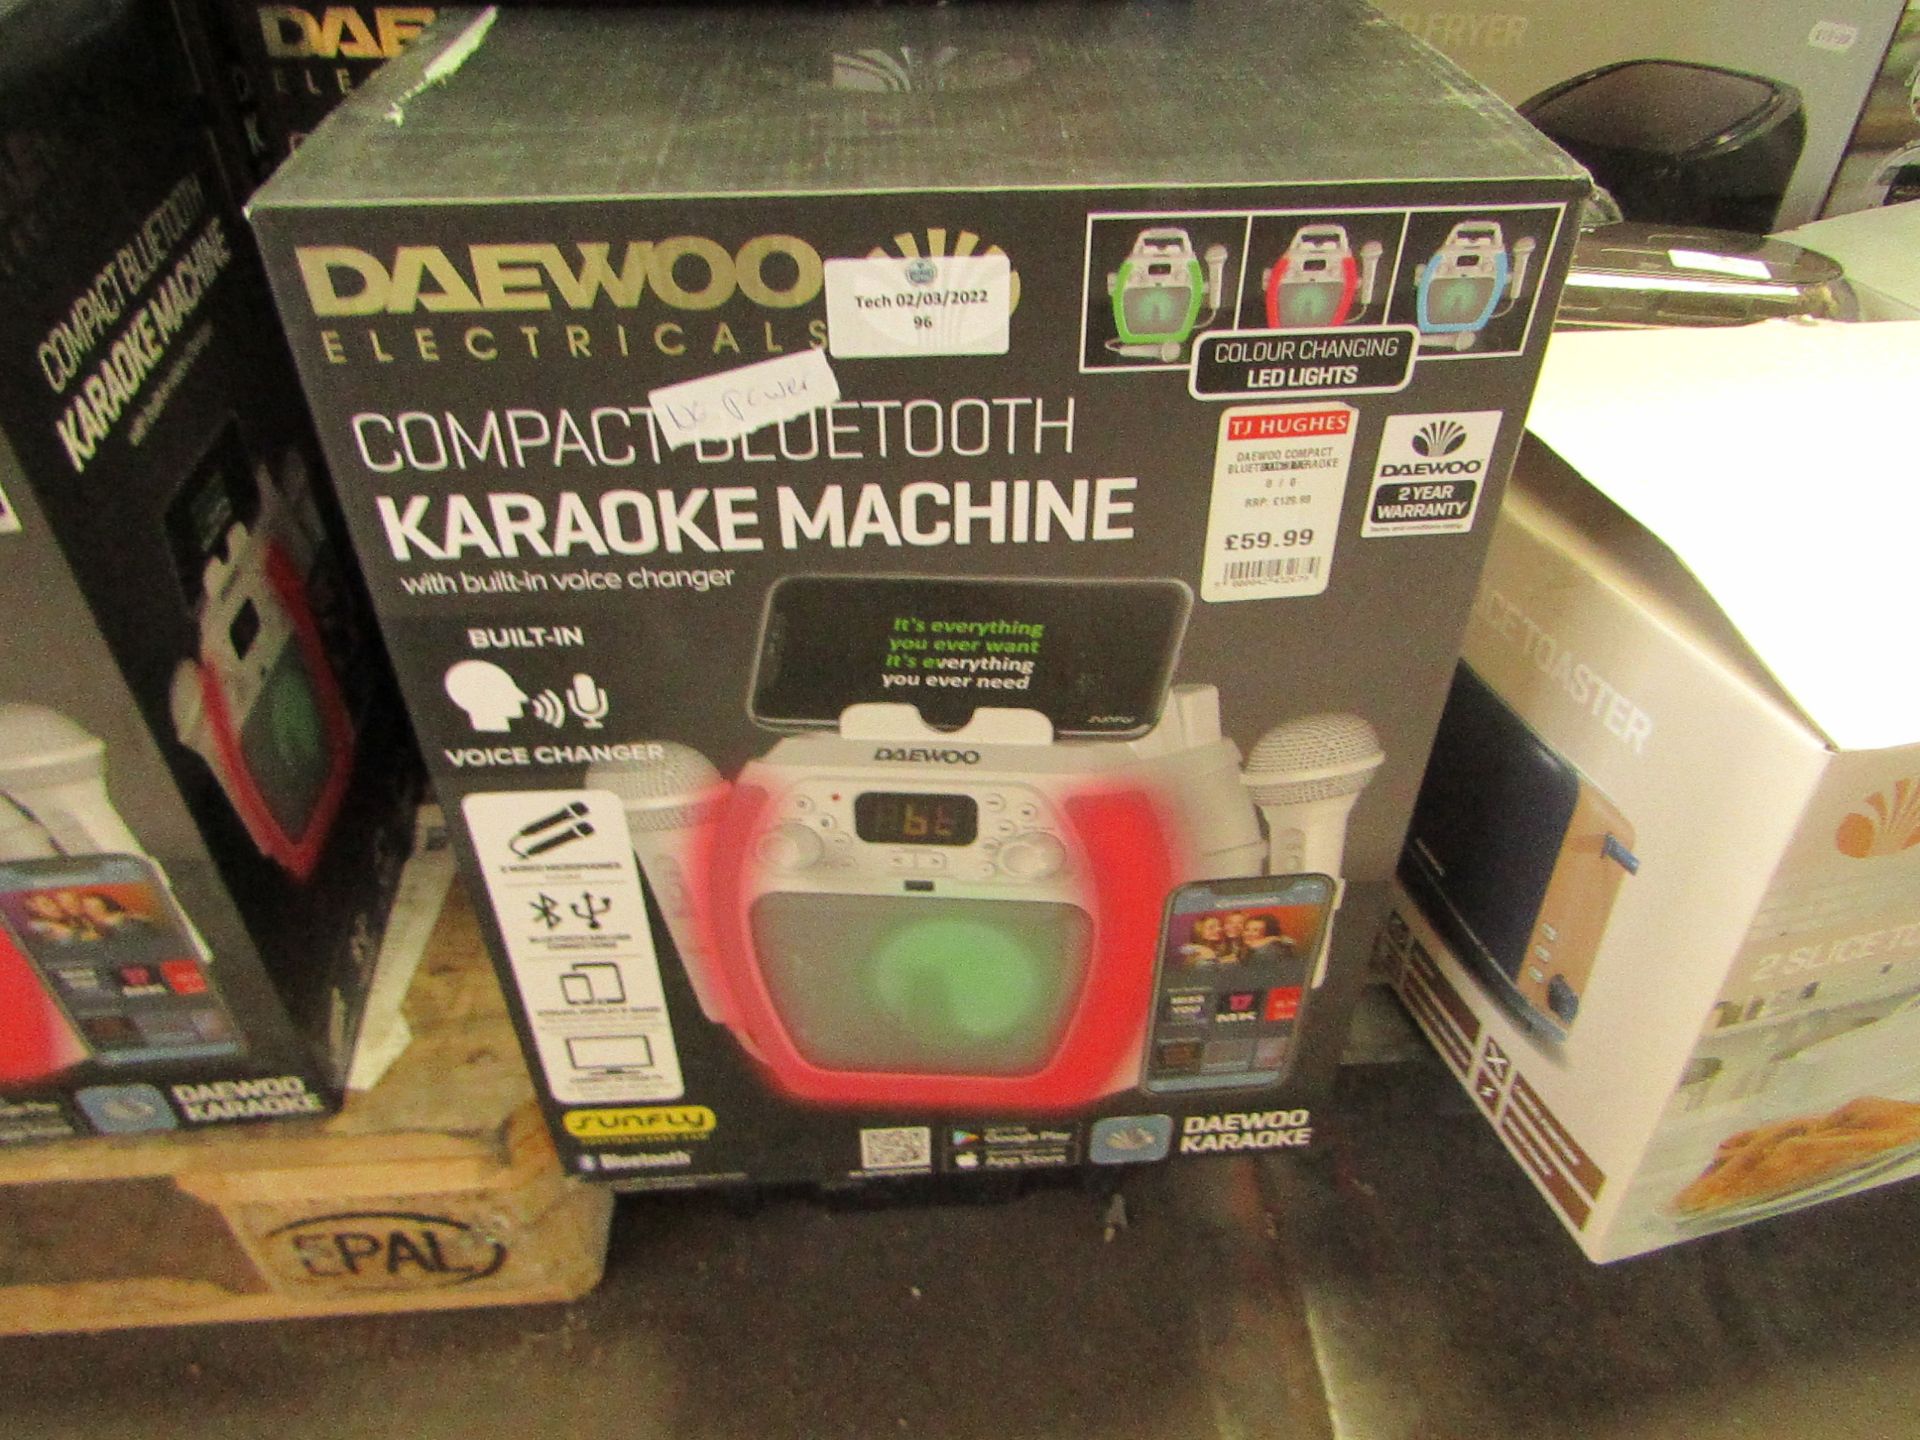 1X Daewoo Compact Bluetooth Karaoke Machine, Has No Power When Tried To Test, Not Checked Any